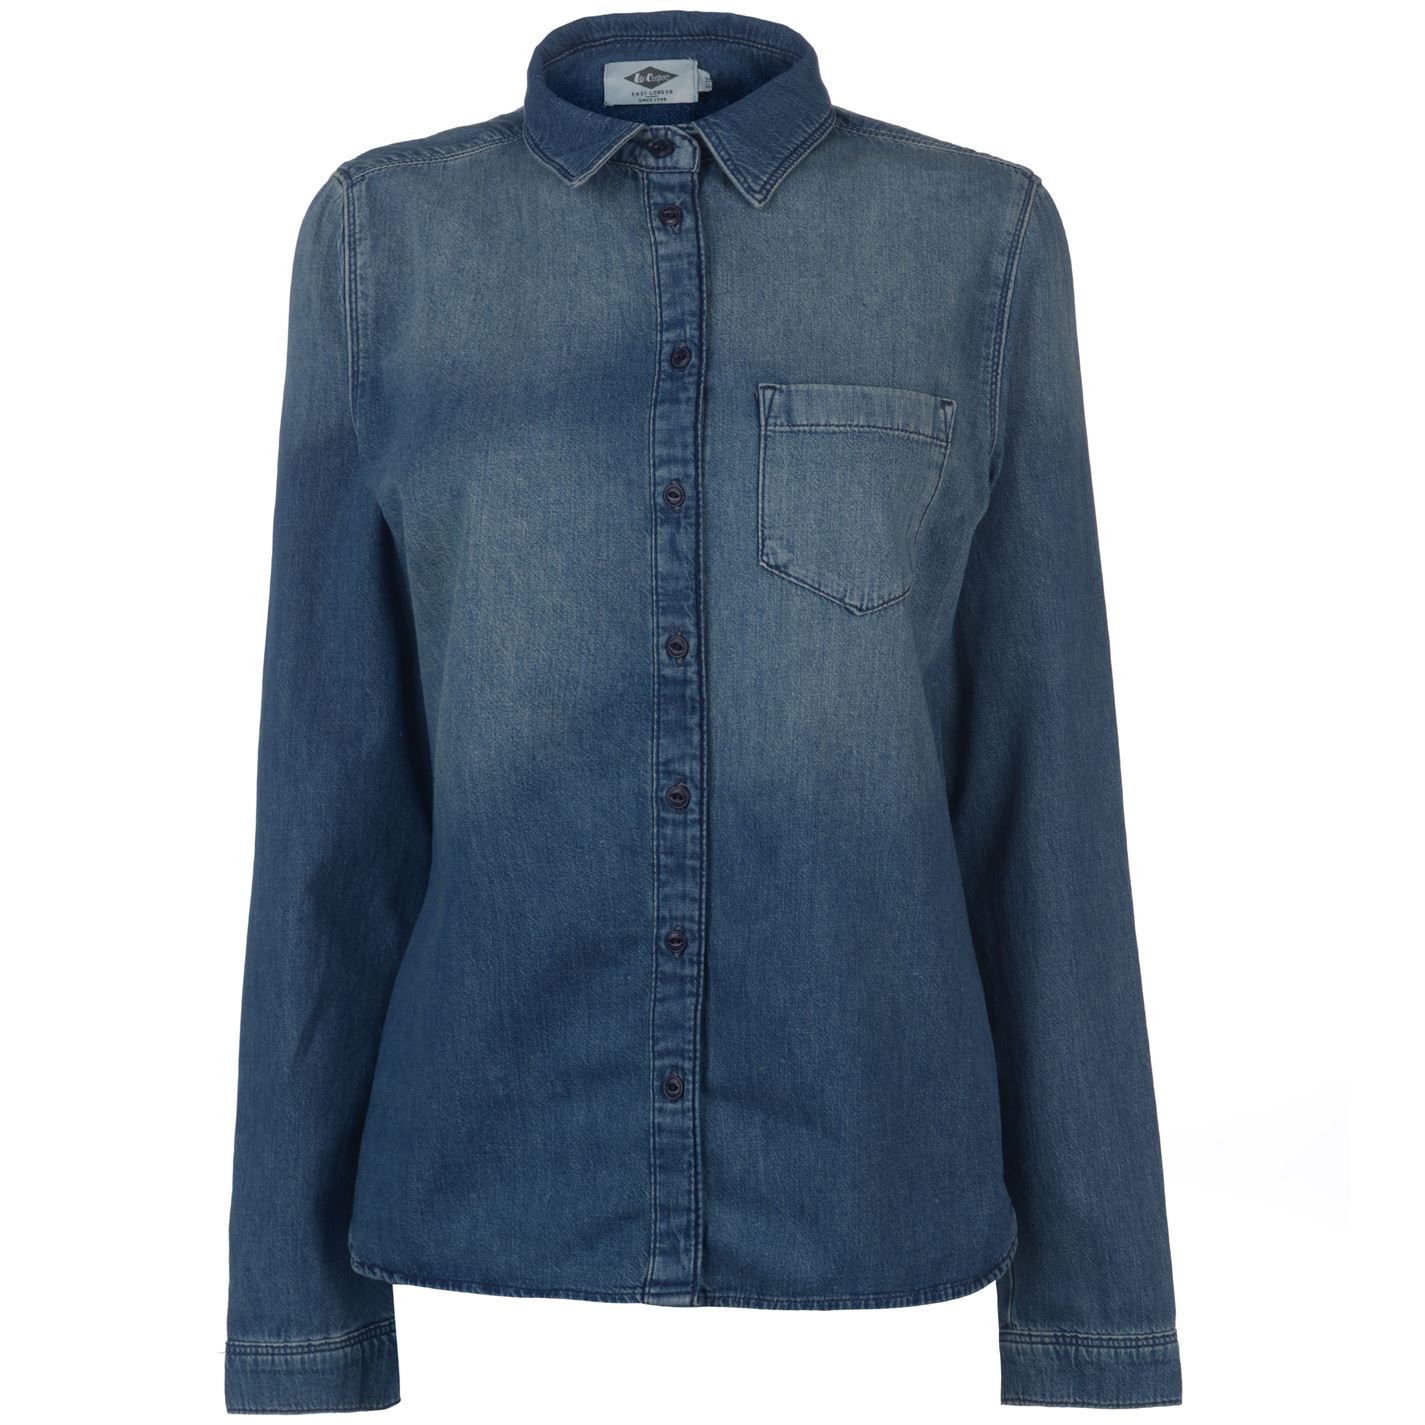 Lee Cooper Washed Chambray Shirt